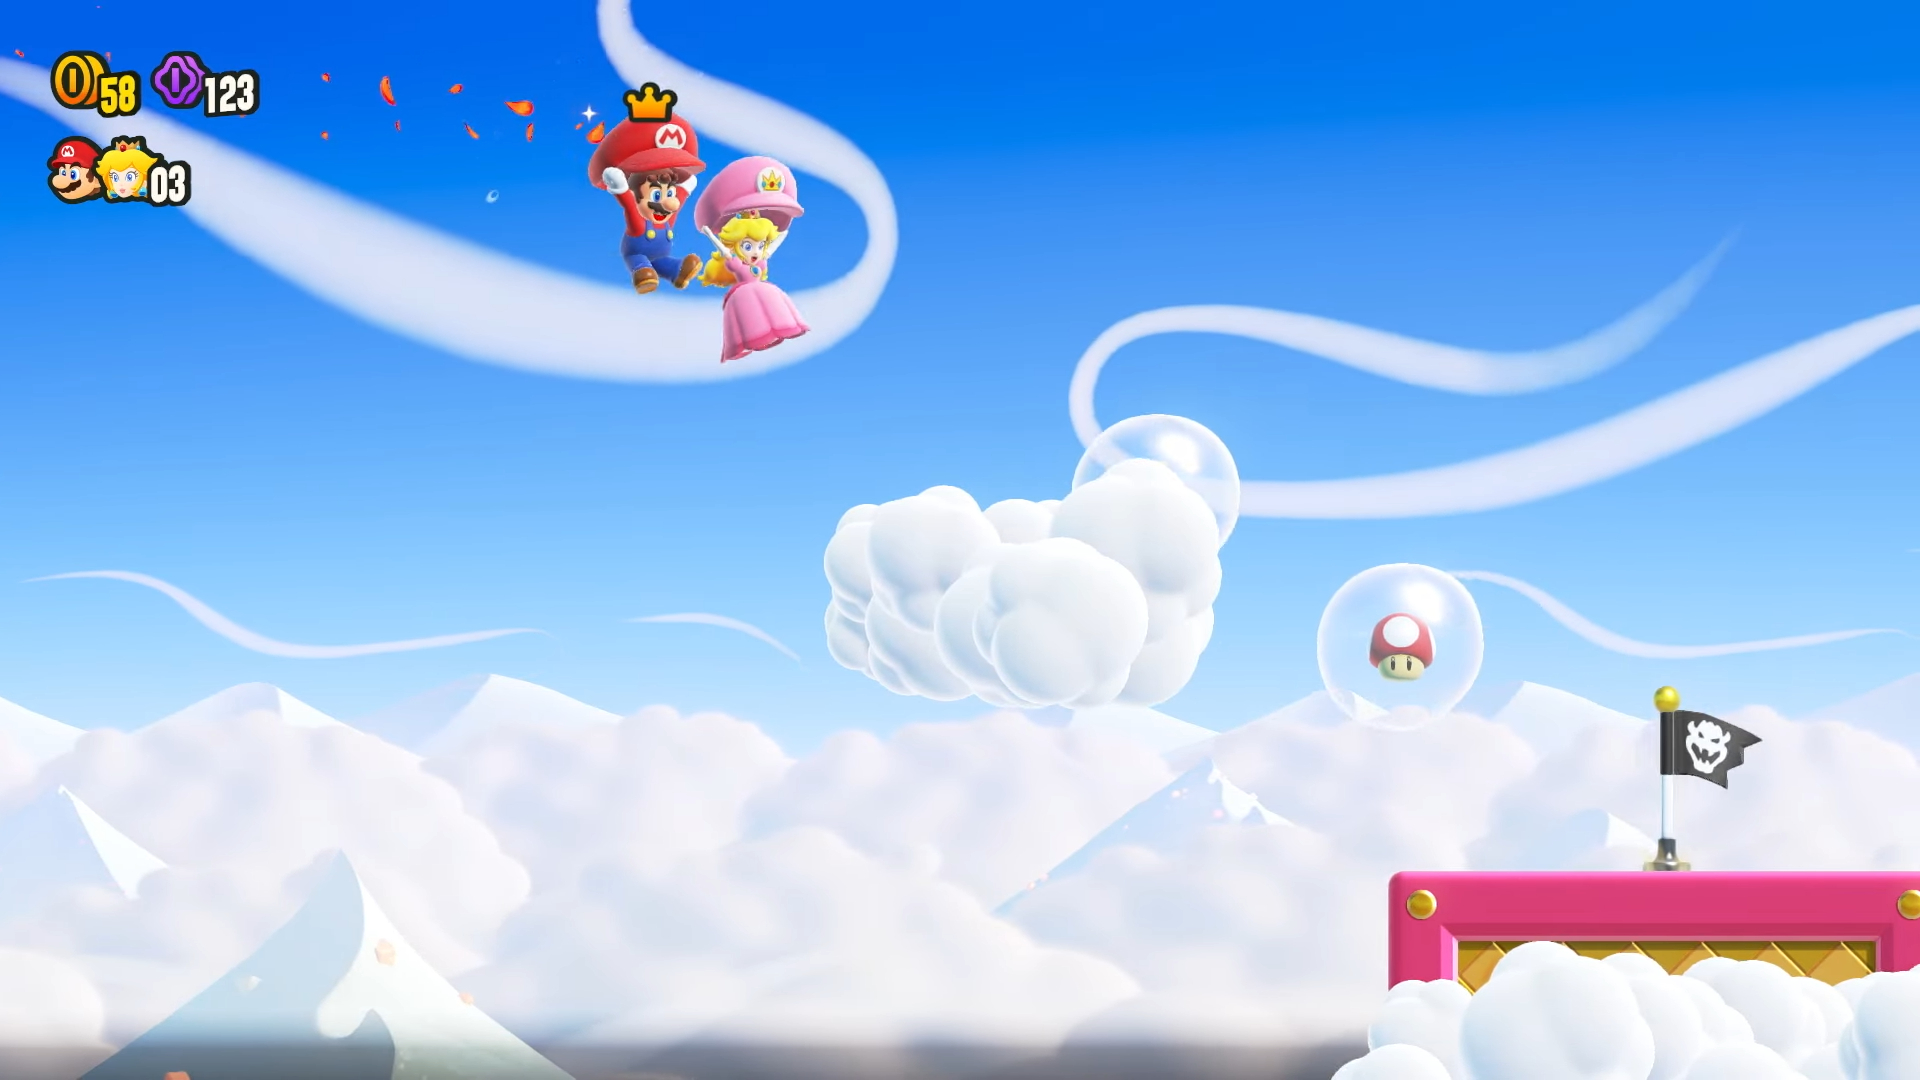 Mario and Peach floating using their hats.